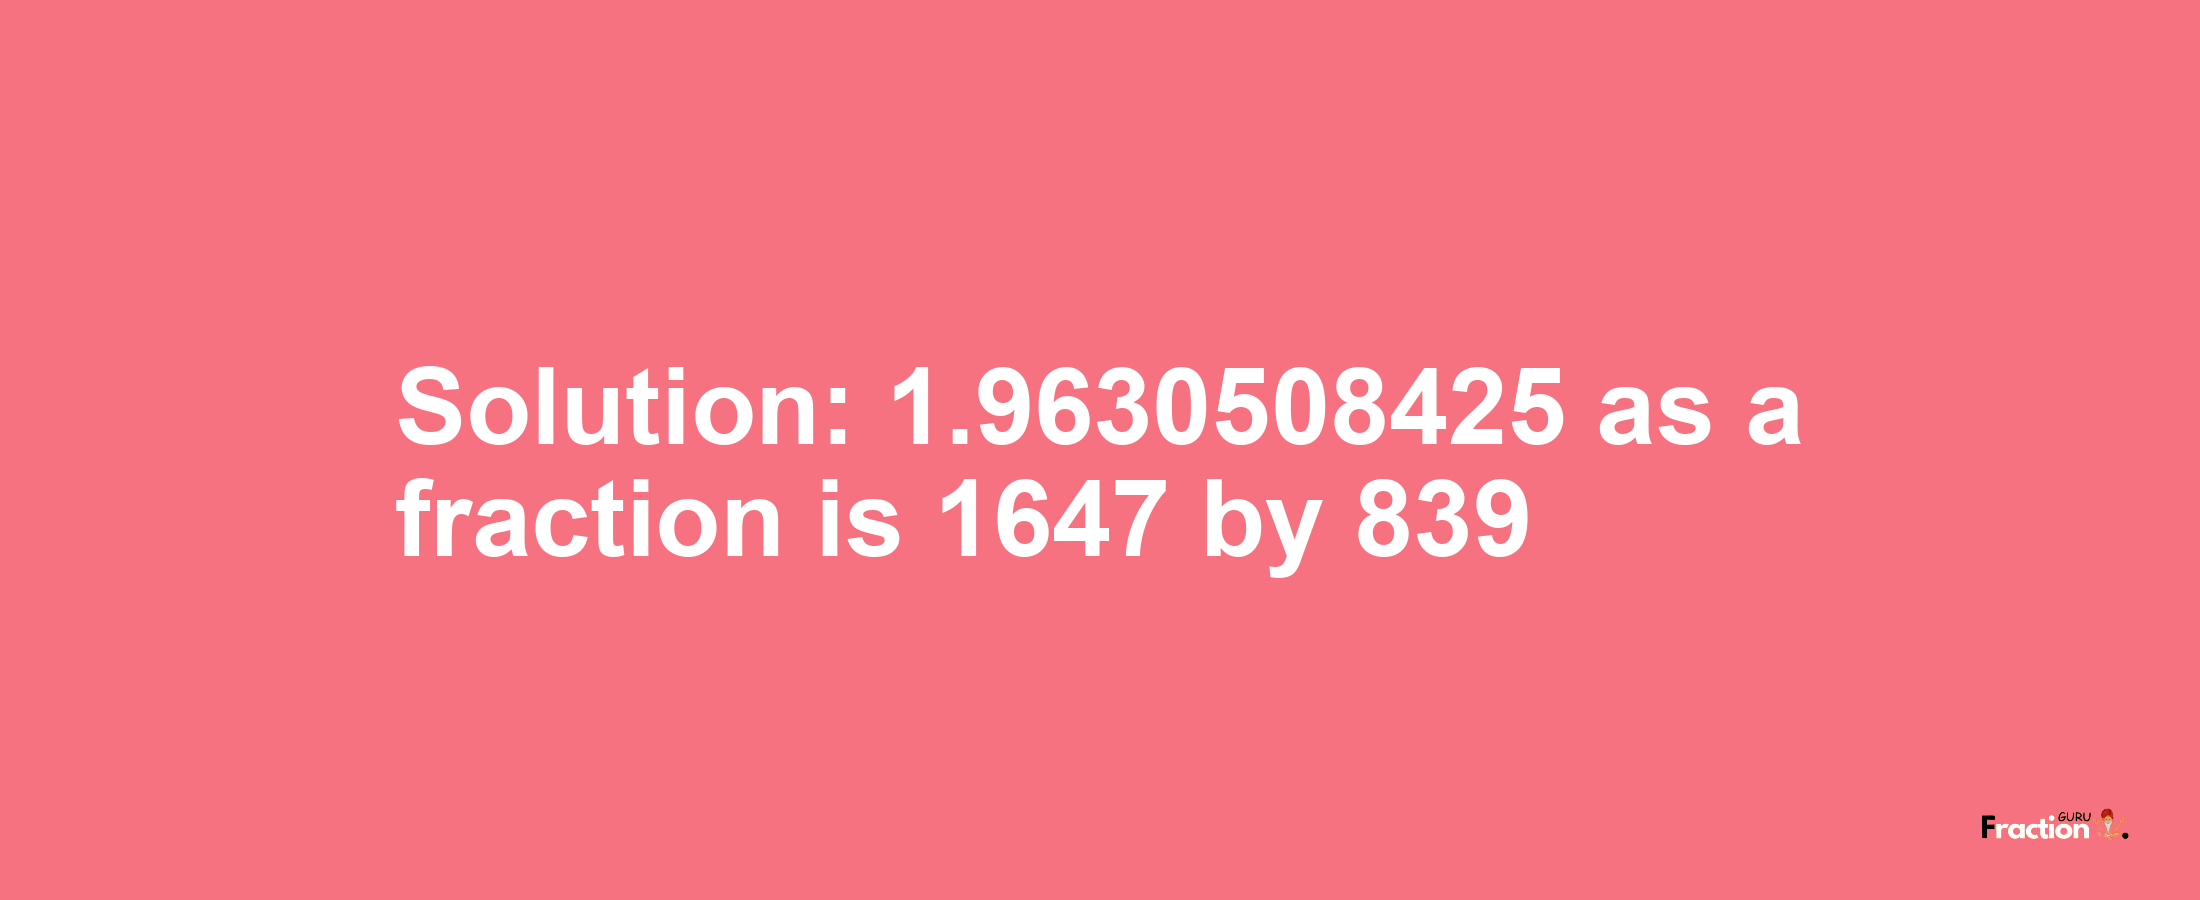 Solution:1.9630508425 as a fraction is 1647/839